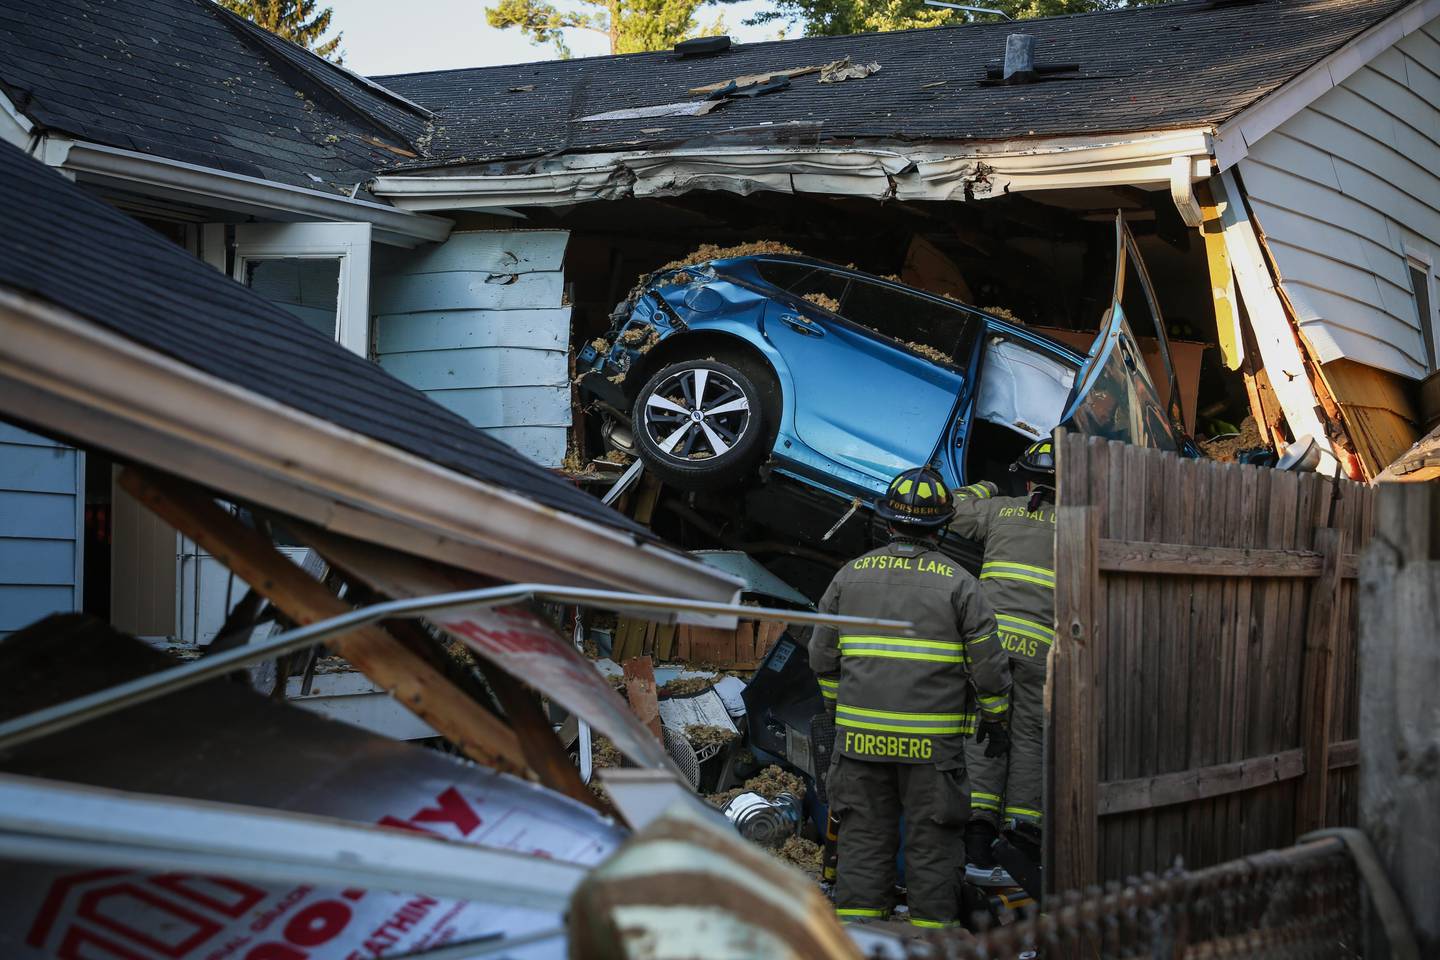 A vehicle crashed into a detached garage and home in Crystal Lake Wednesday, July 27, 2022, causing two people to sustain life-threatening injuries.